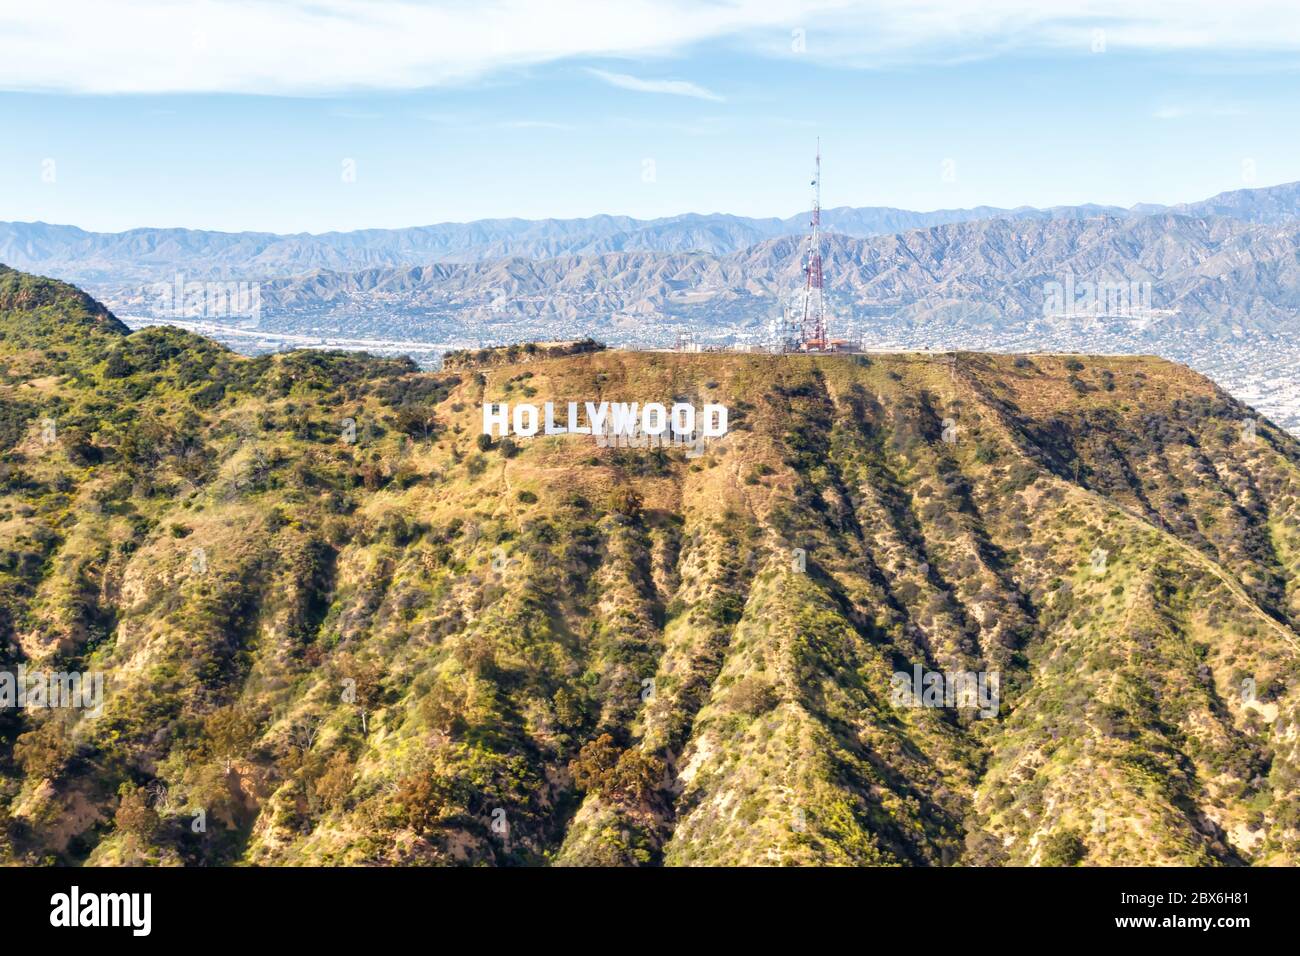 Los Angeles, California - April 14, 2019: Hollywood sign Los Angeles aerial view hills in California. Stock Photo